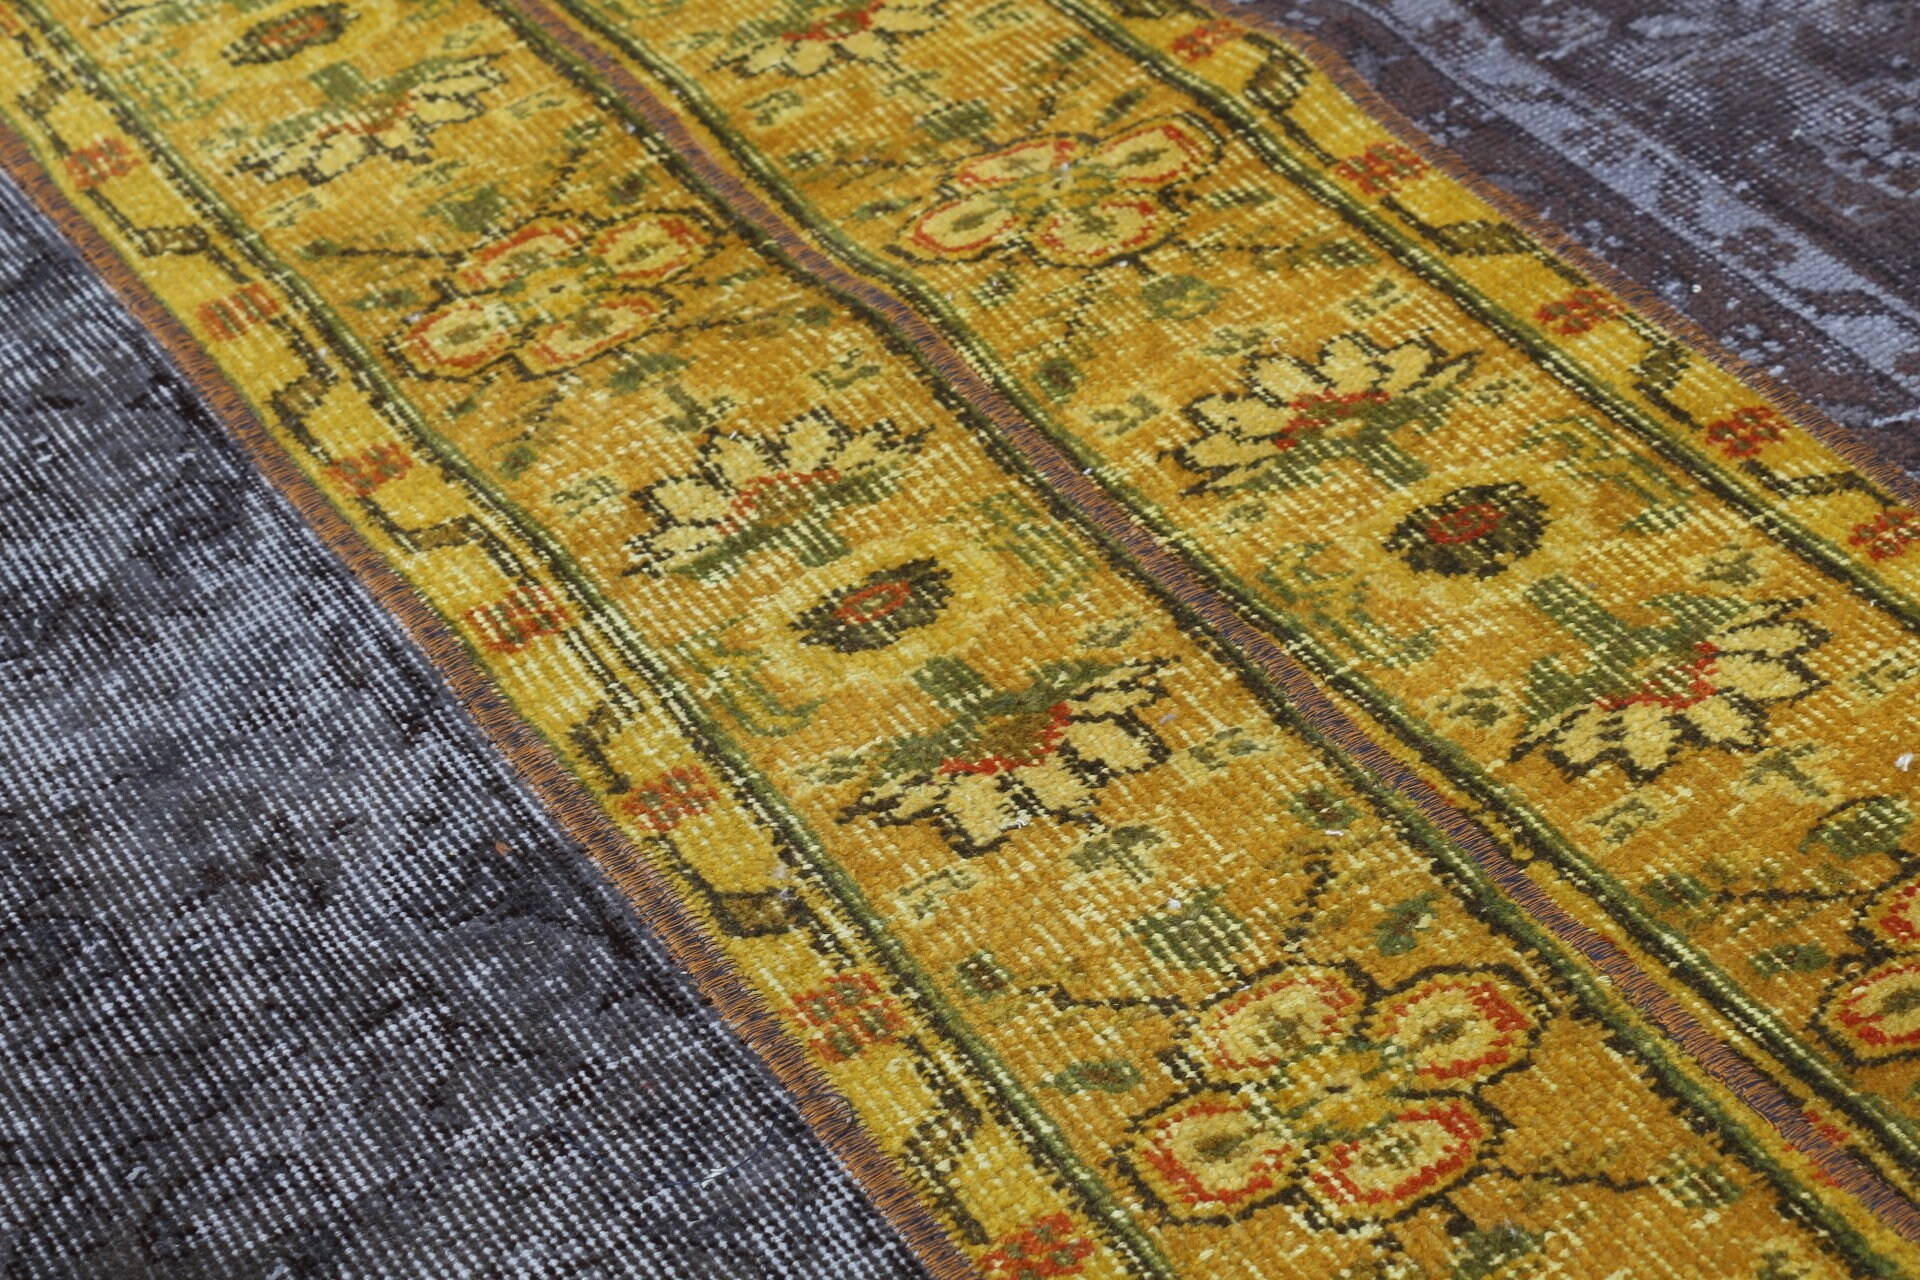 Kitchen Rug, Yellow Antique Rug, Entry Rugs, 3.2x5.9 ft Accent Rug, Rugs for Entry, Vintage Rug, Antique Rug, Bedroom Rug, Turkish Rug